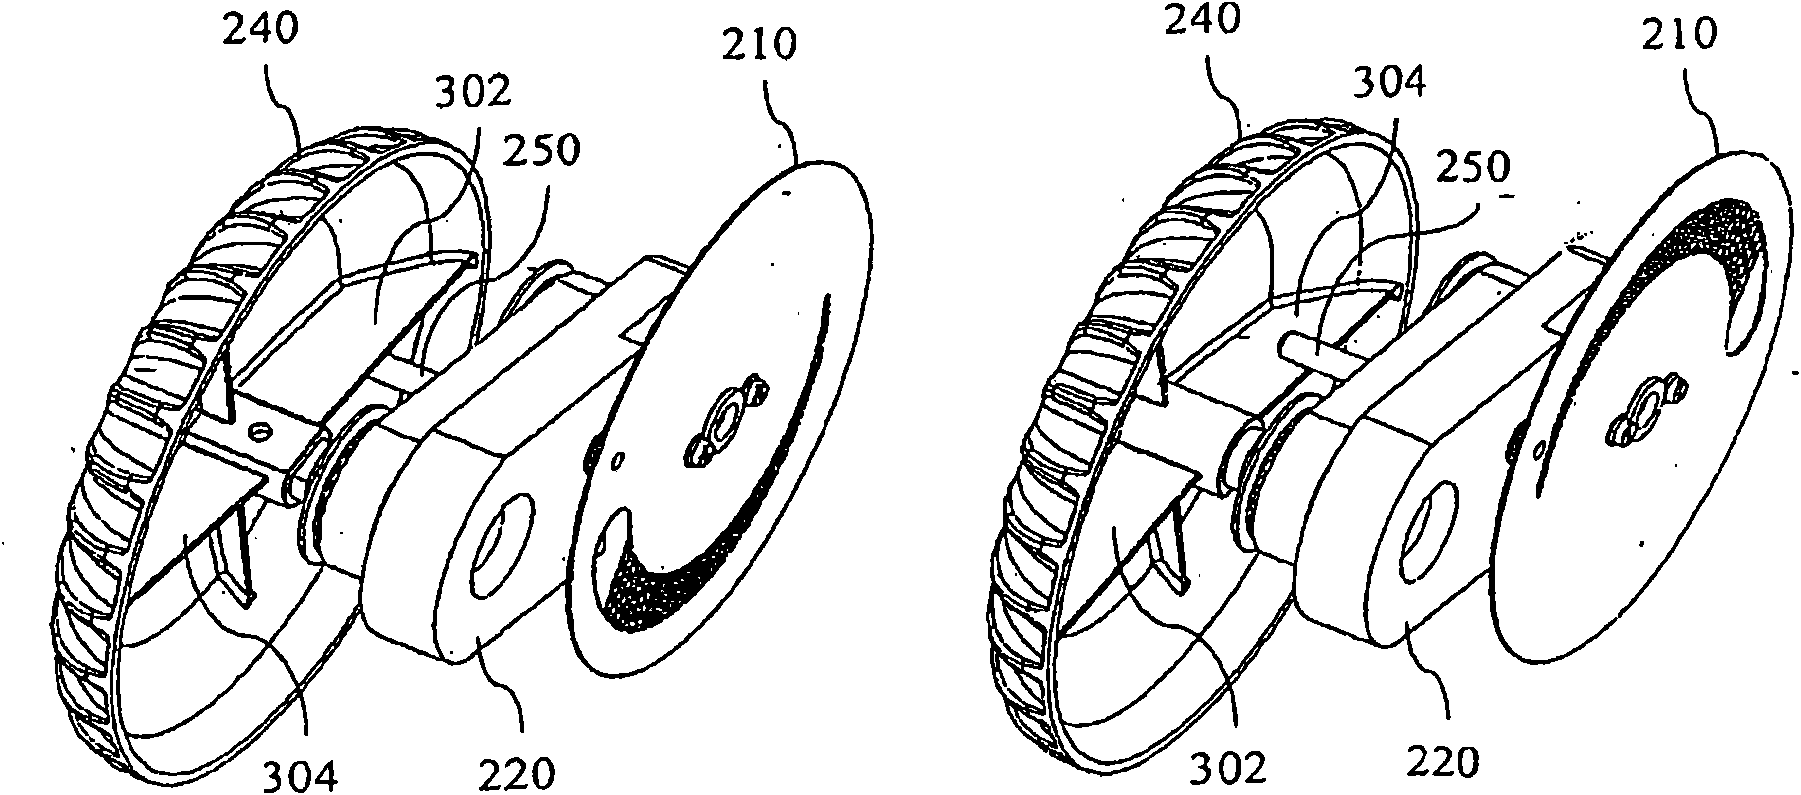 An illumination control device in an endoscopic imaging system